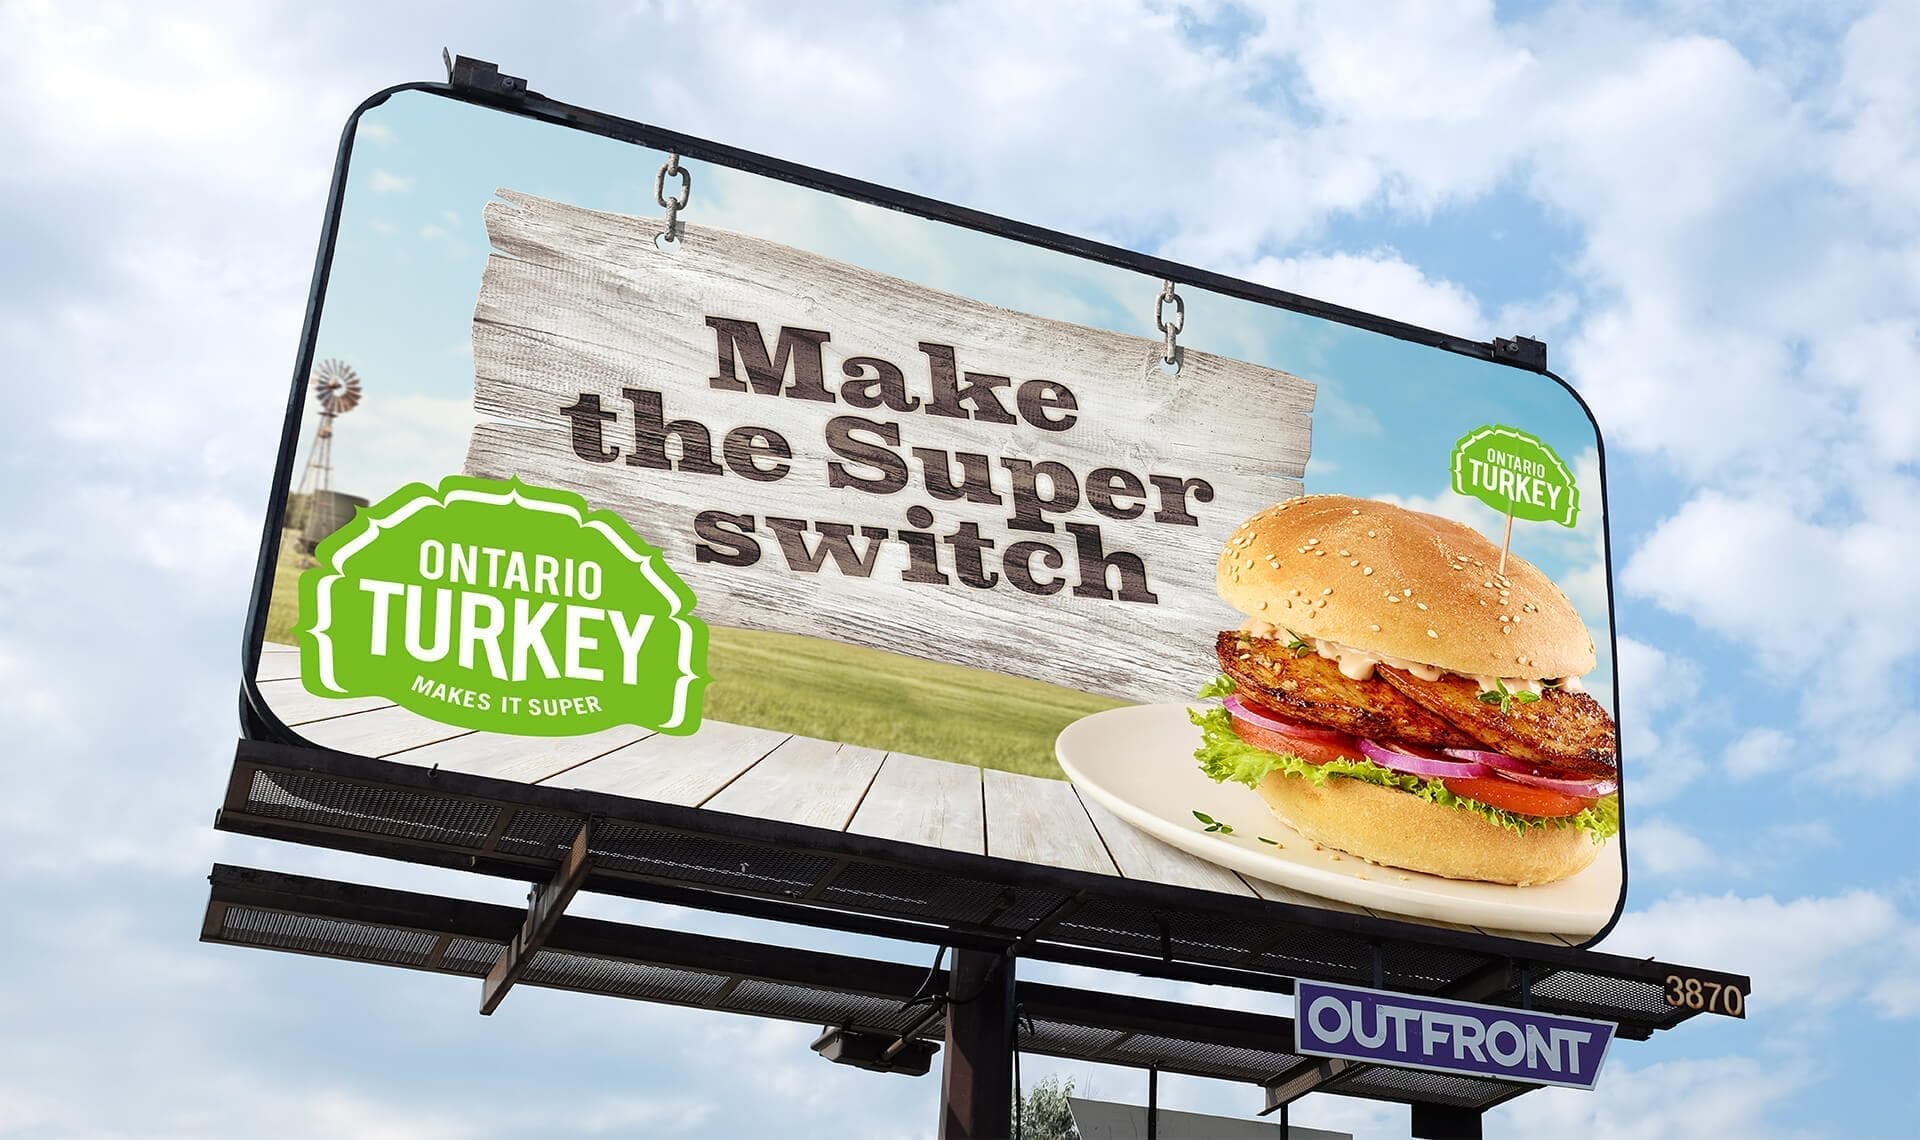 Ontario Turkey out-of-home billboard